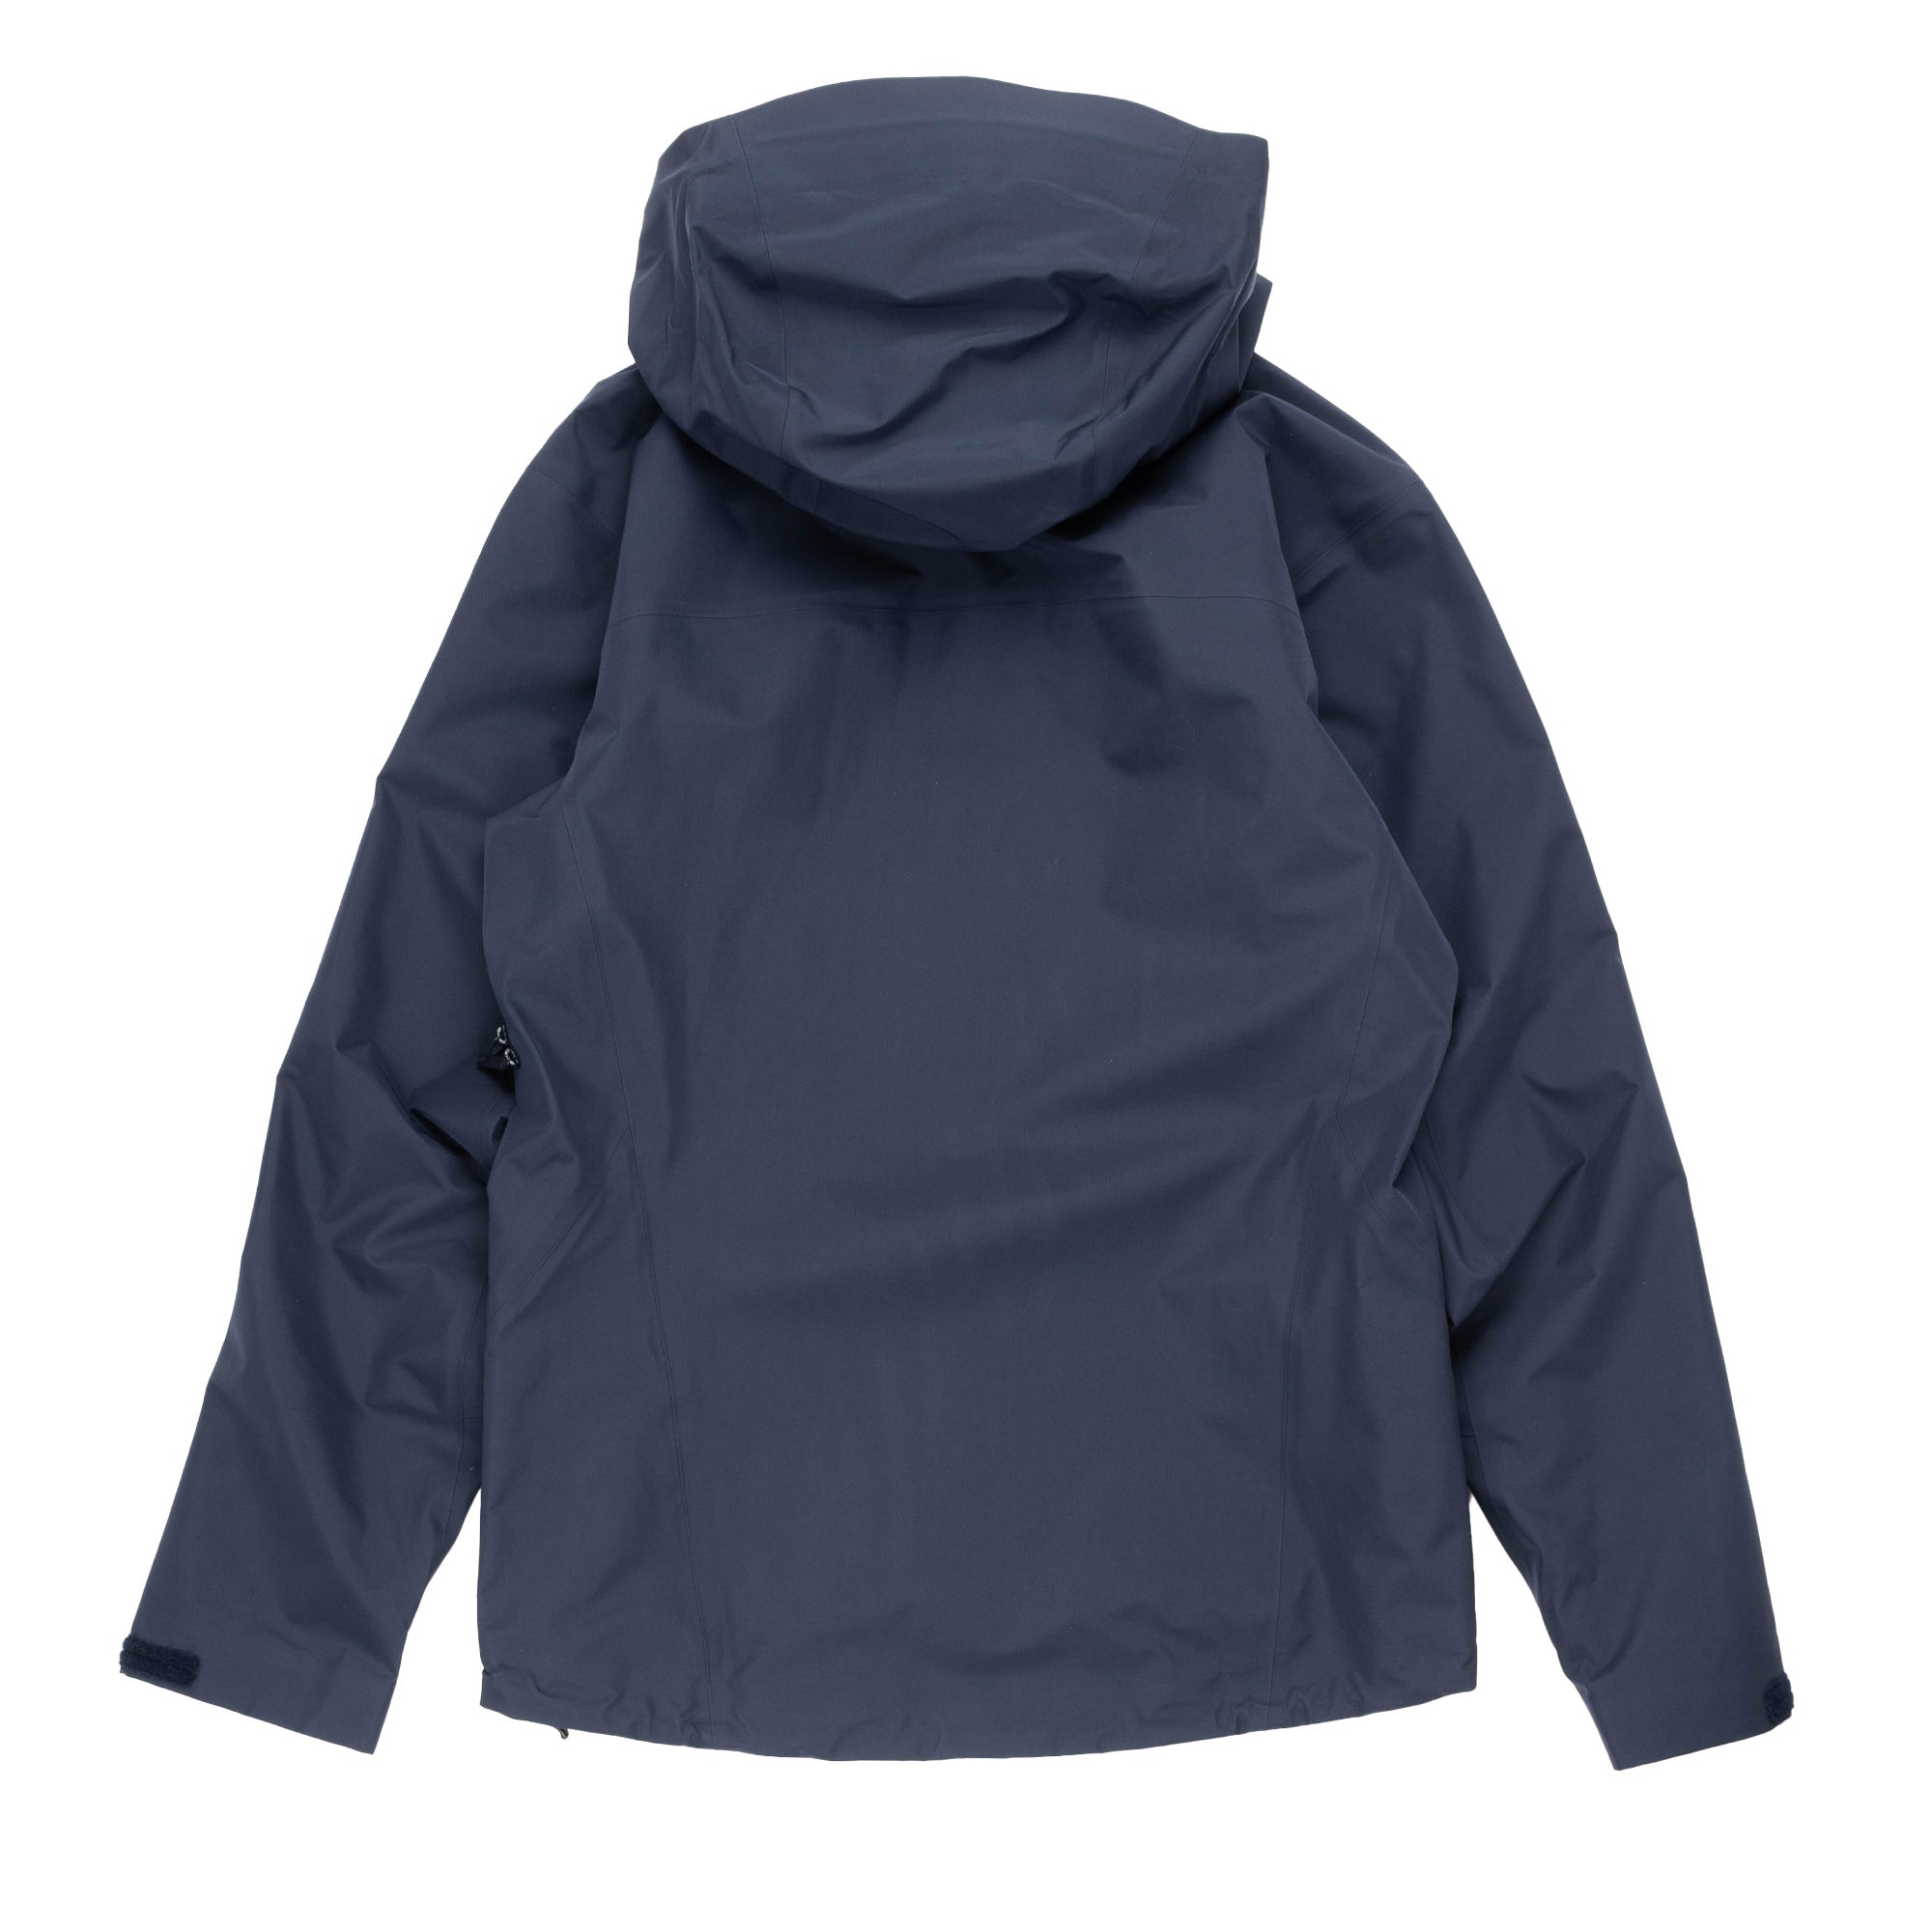 Outerwear – Capsule